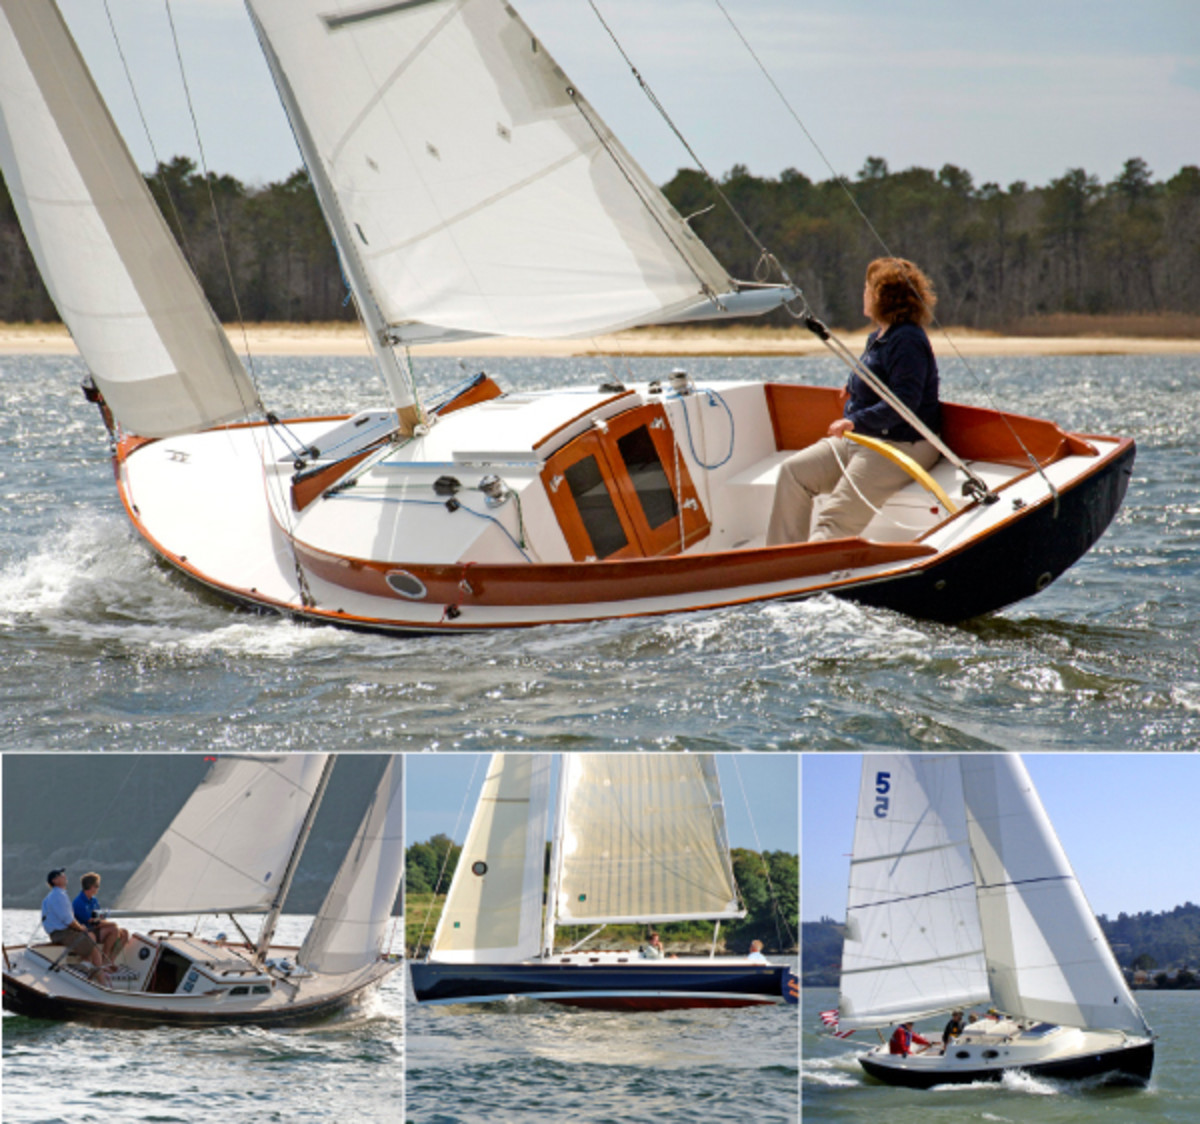 Today’s “modern classics” look as good as they sail, maybe even better: (clockwise from top) the 23-foot Marlin, W.D. Schock Harbor 25, S&S 30 and the Morris 29 